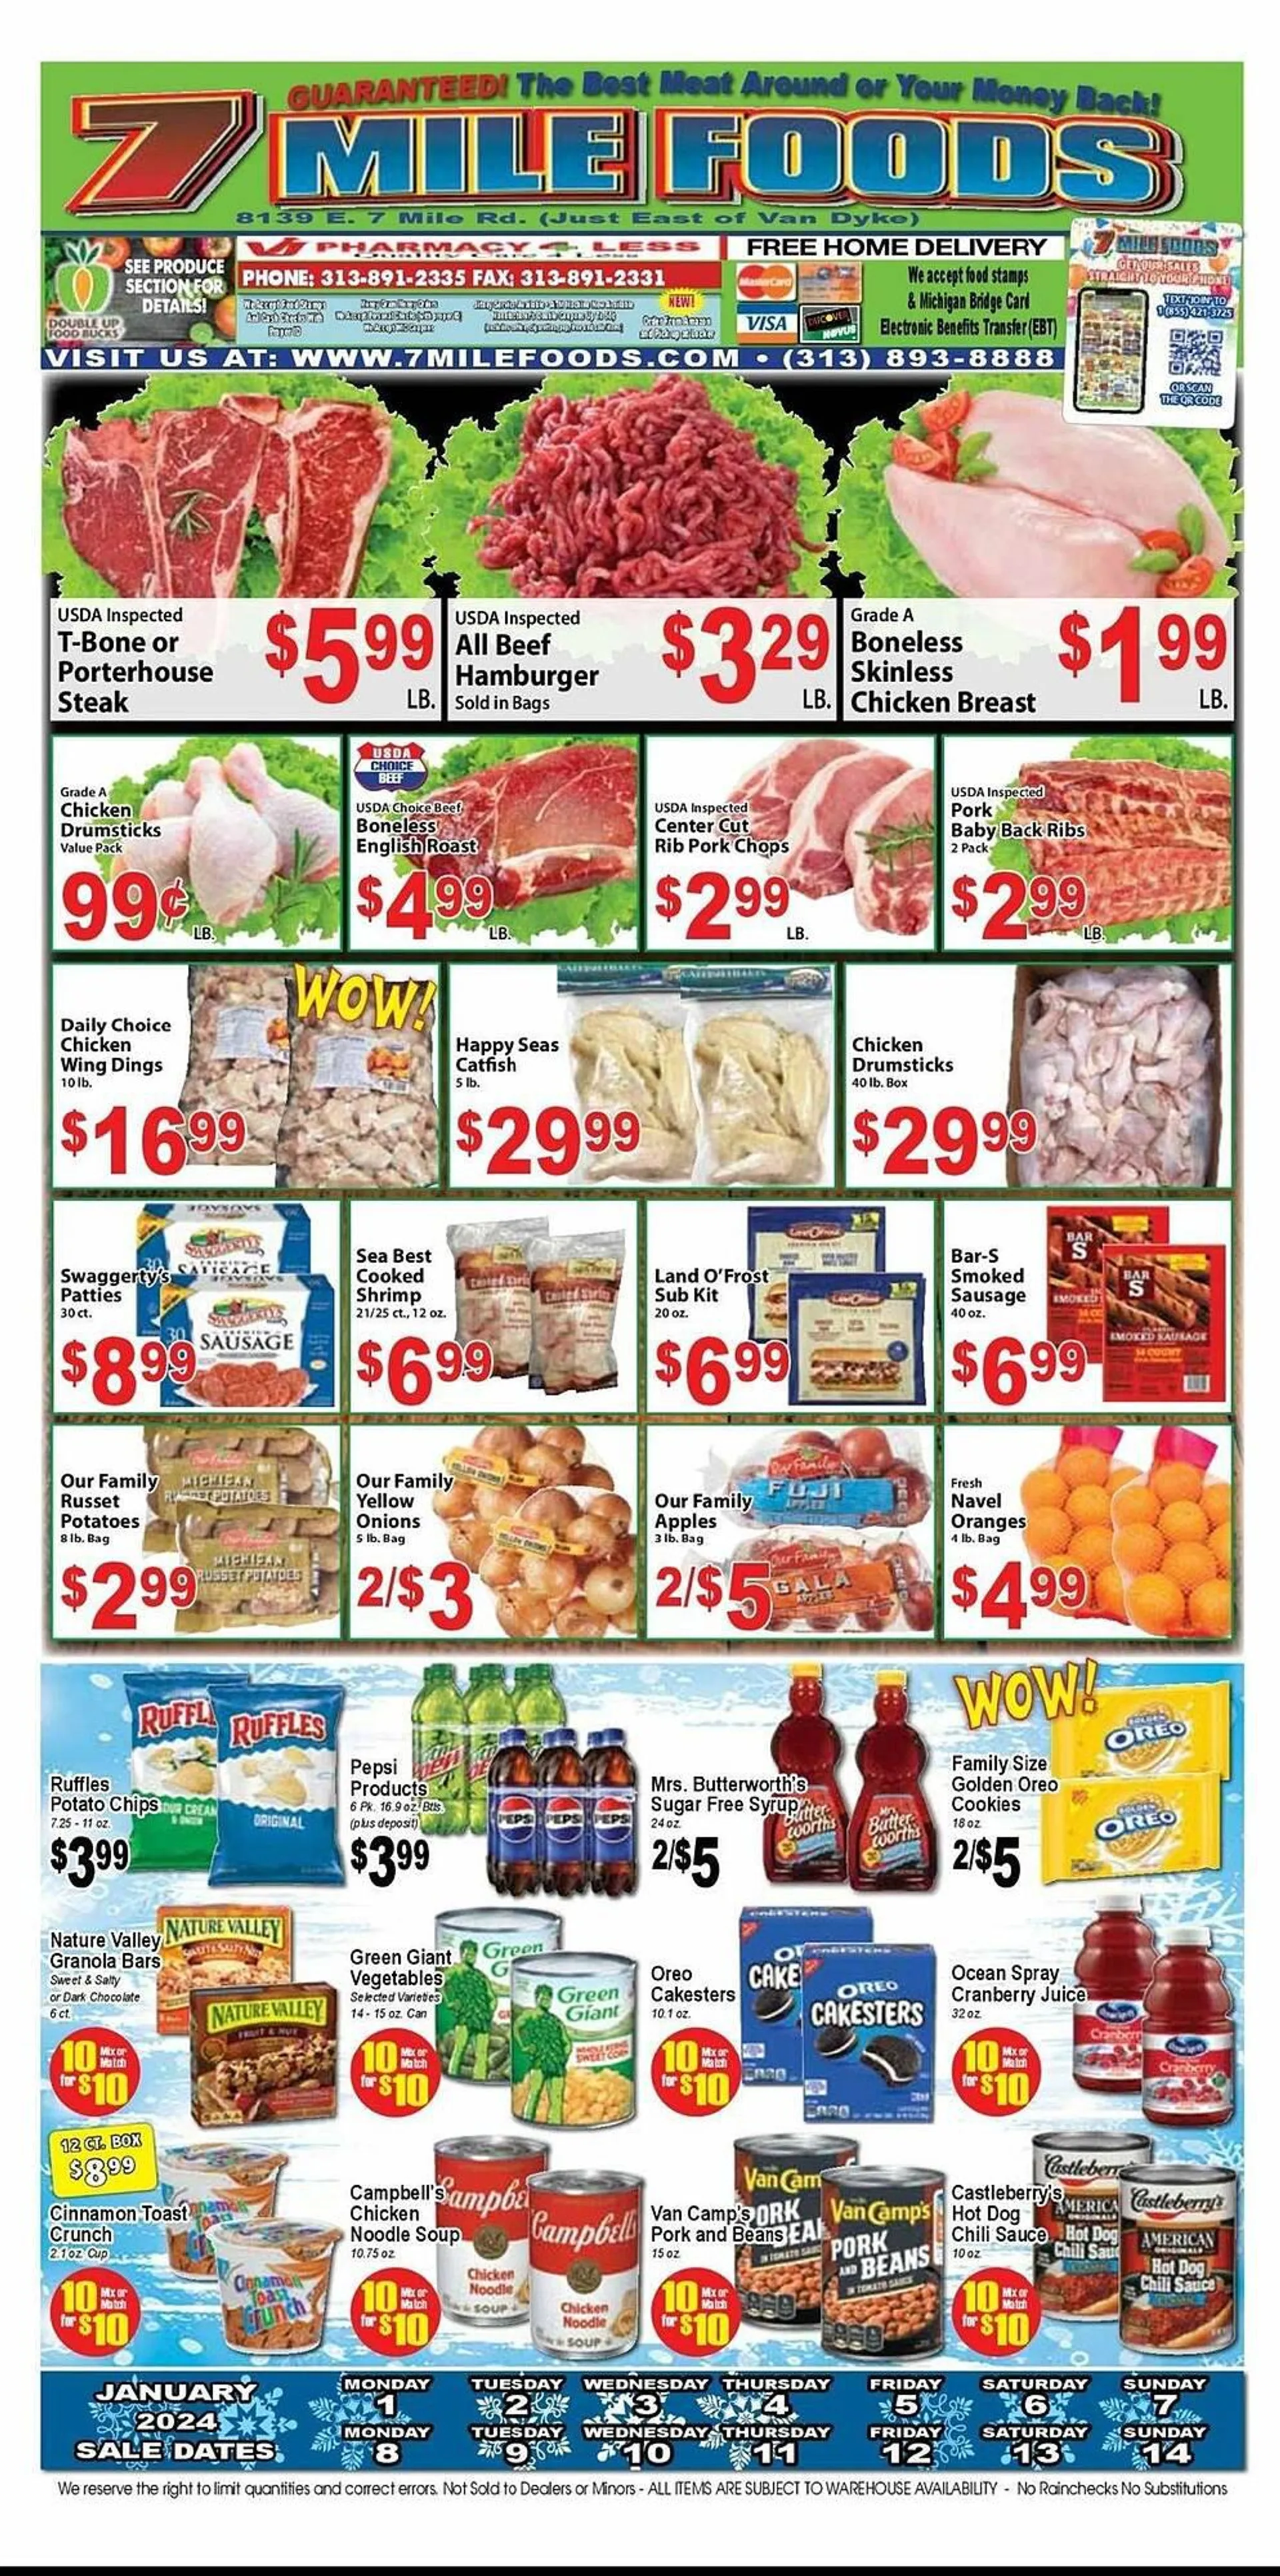 Weekly ad 7 Mile Foods Weekly Ad from January 1 to January 14 2024 - Page 